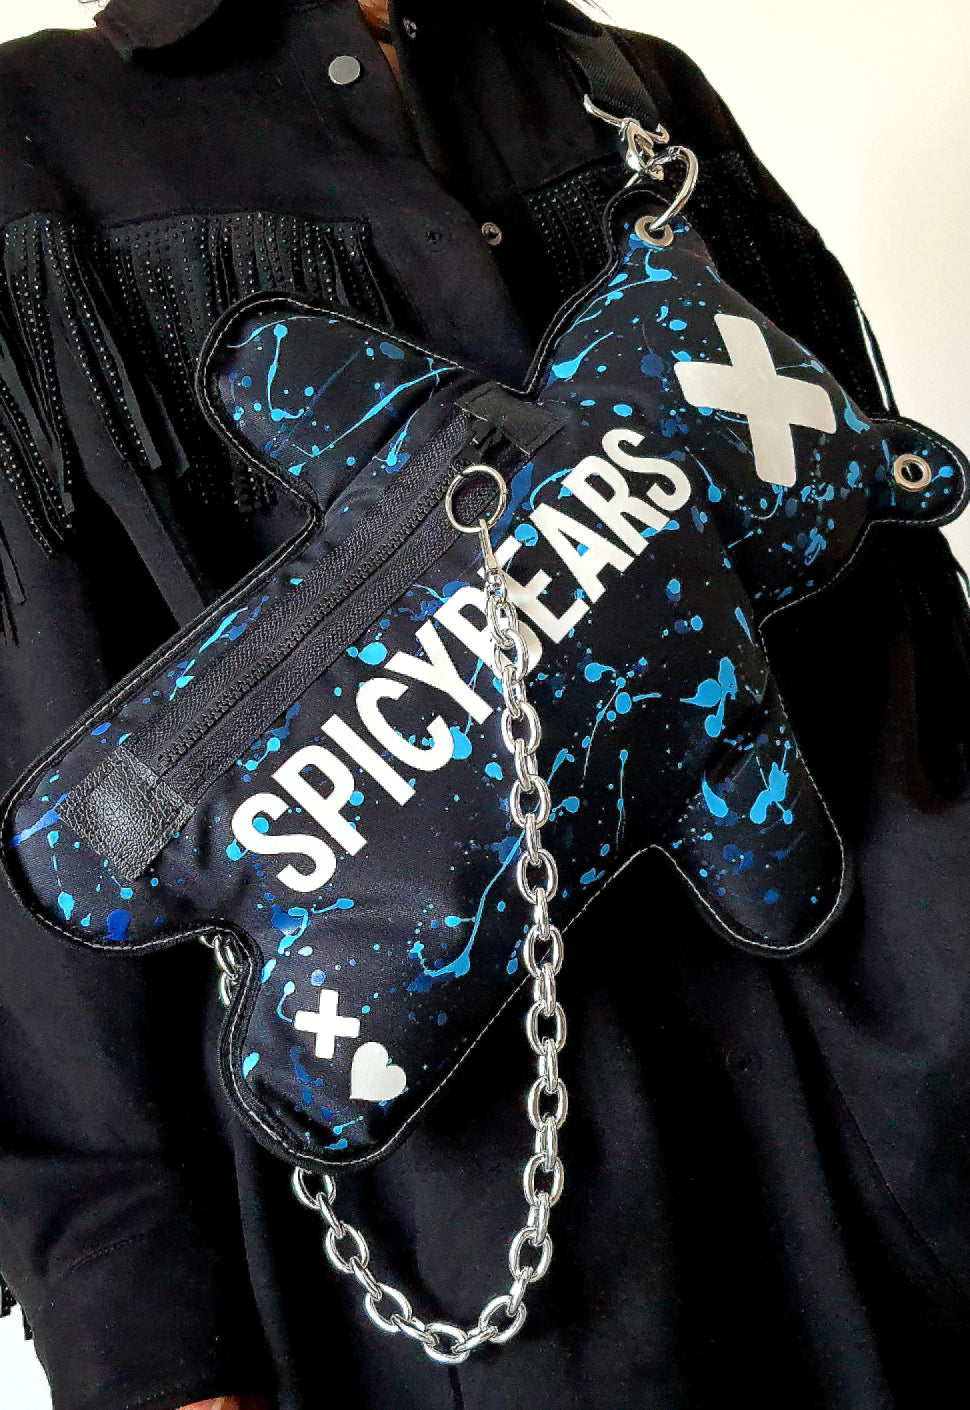 Black | White Reflective SPICYBEARS Bag with a Splash Of Blue - SPICYBEARS